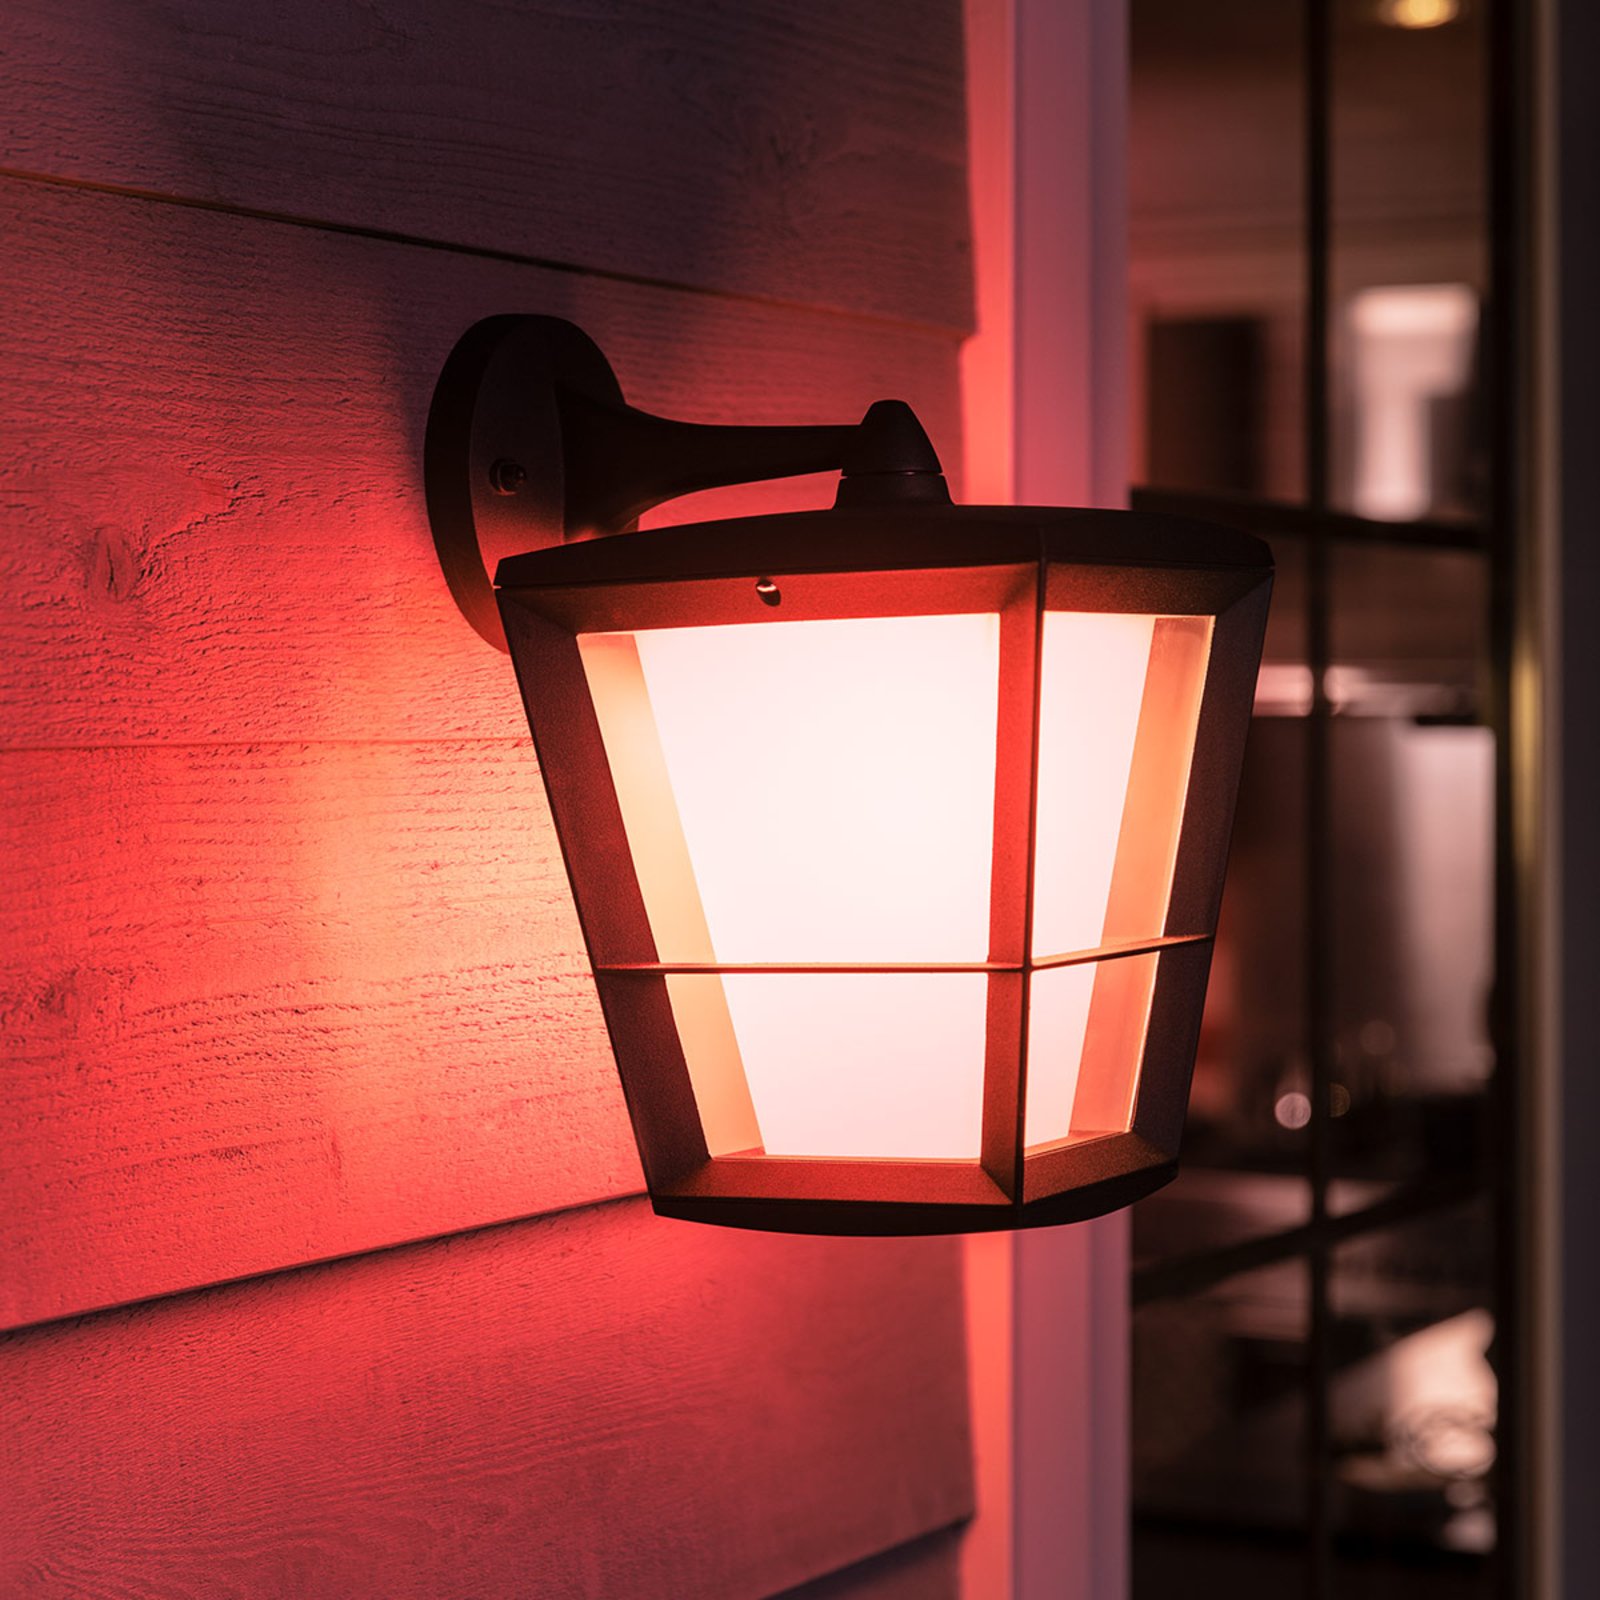 Philips Hue White+Color Econic wall light, under